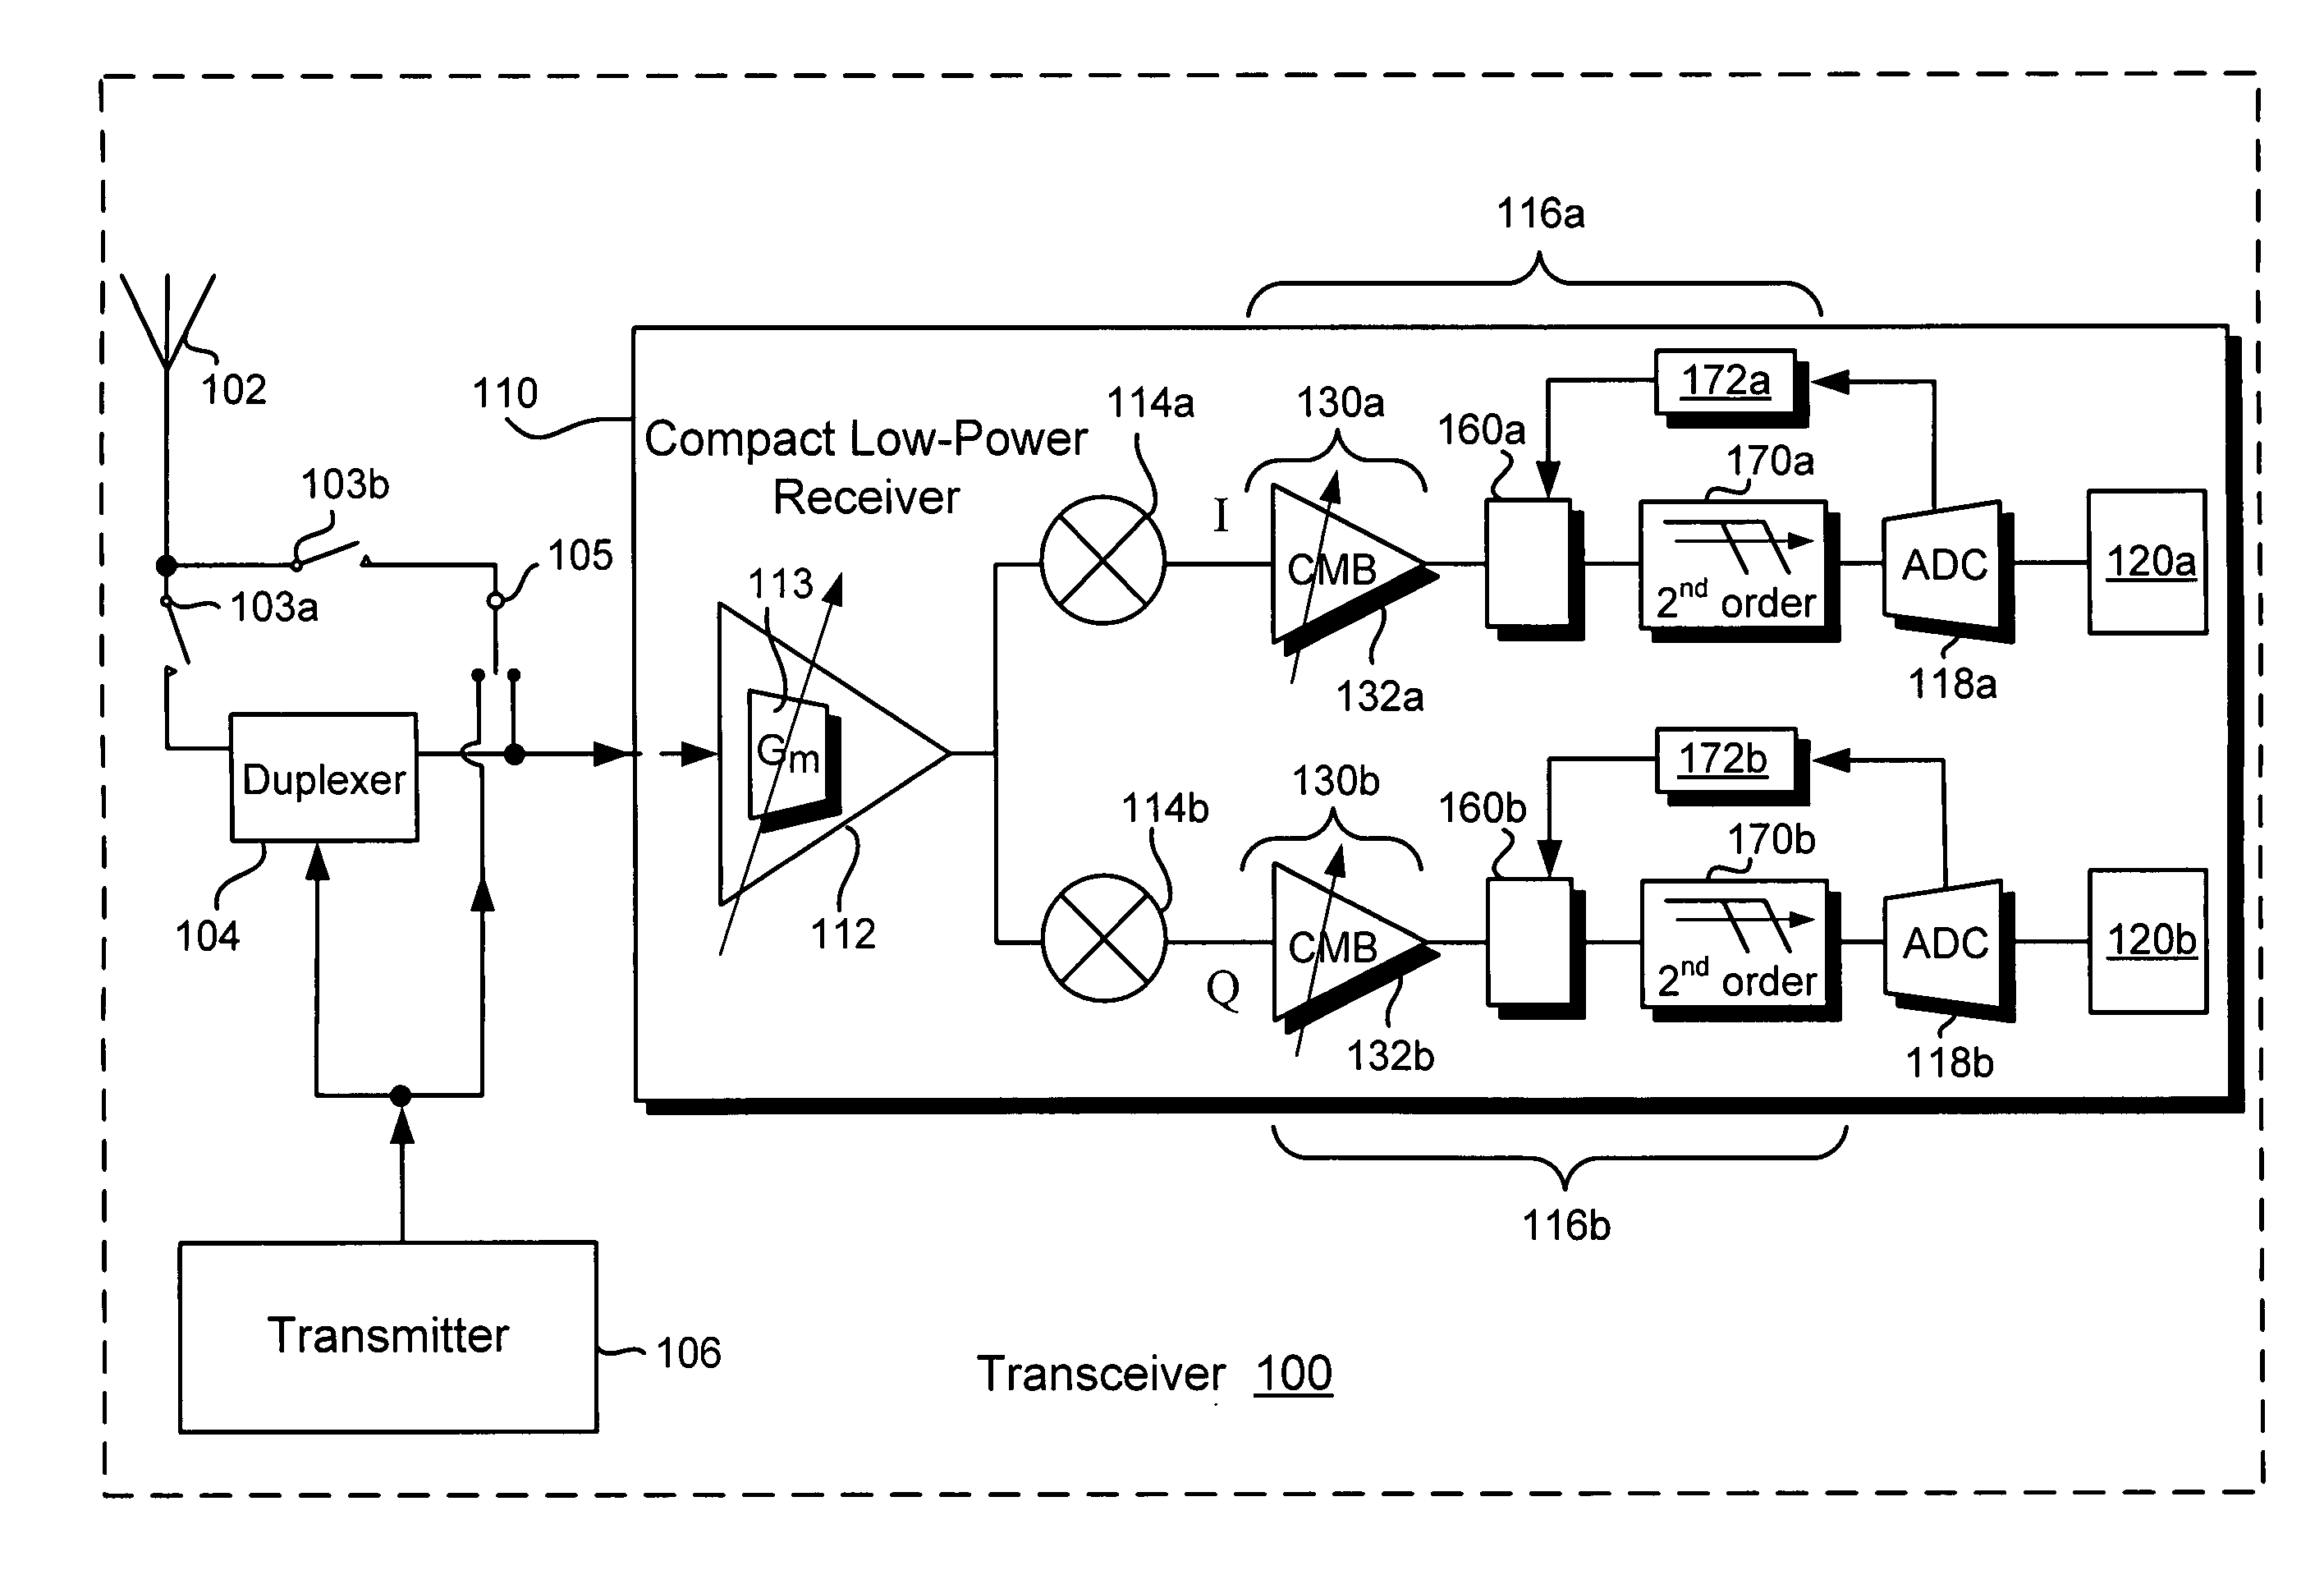 Compact low-power receiver including transimpedance amplifier, digitally controlled interface circuit, and low pass filter